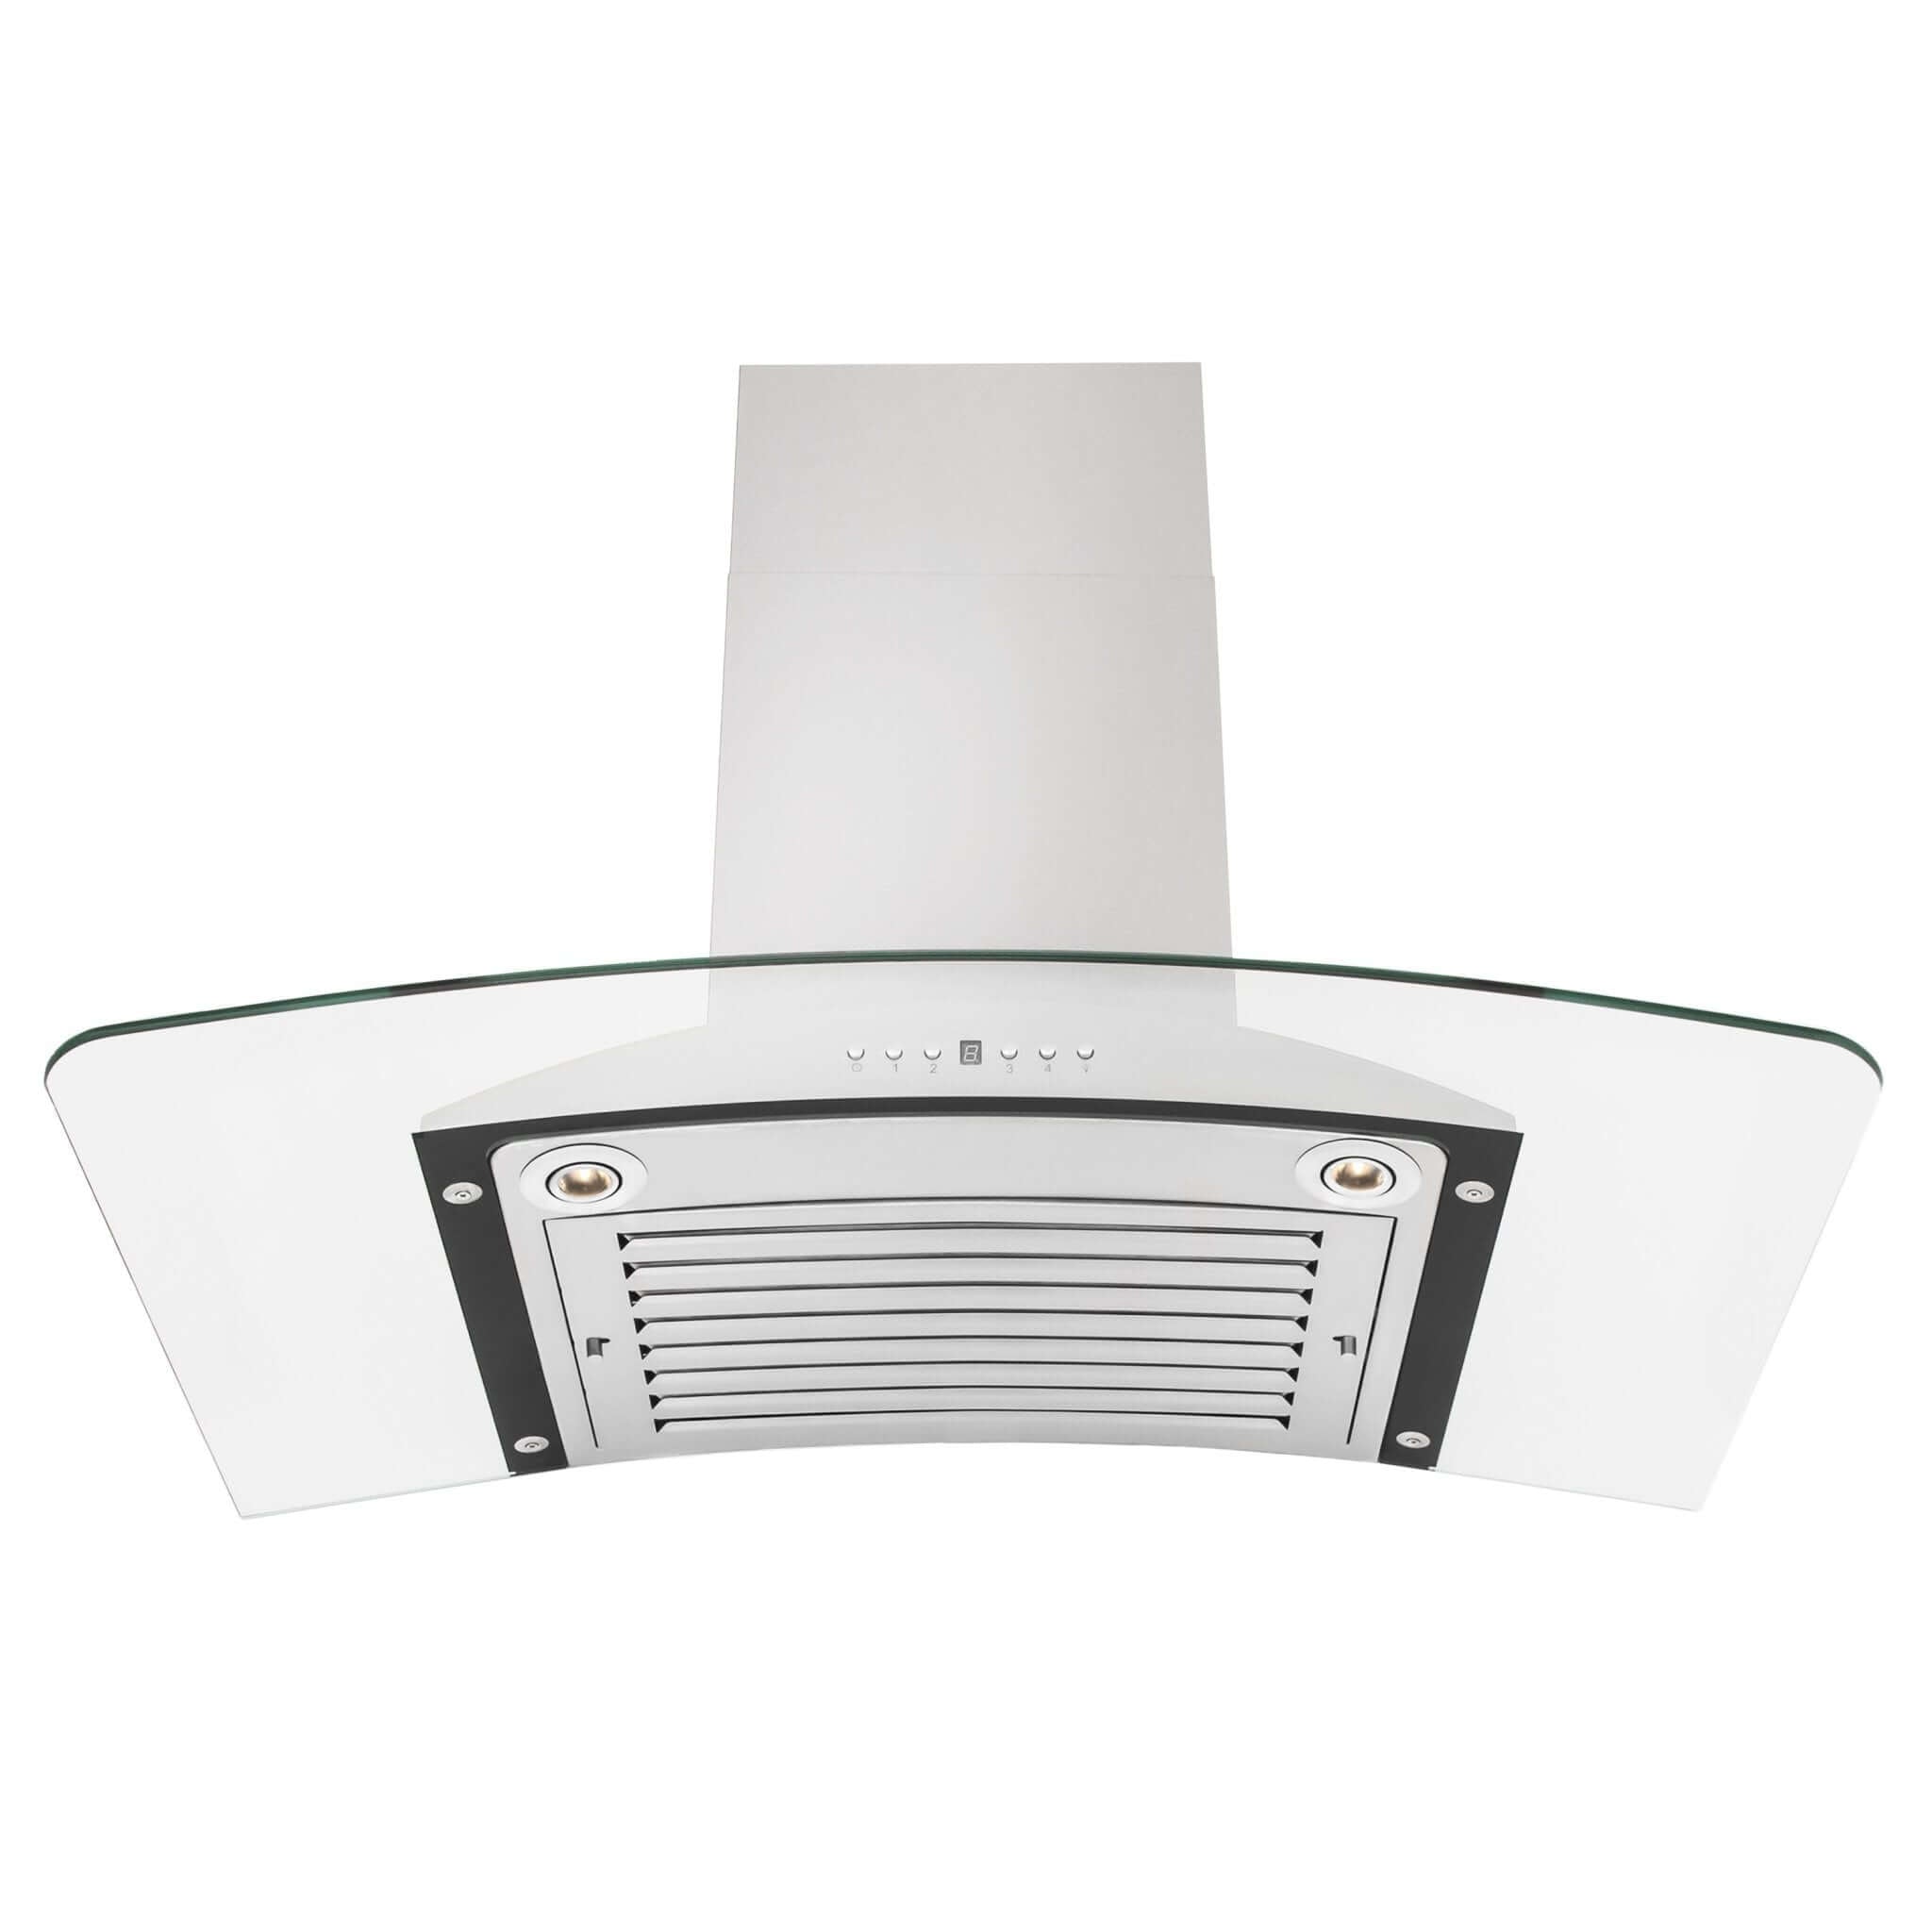 ZLINE Convertible Vent Wall Mount Range Hood in Stainless Steel & Glass (KN) under showing baffle filter and LED lighting.